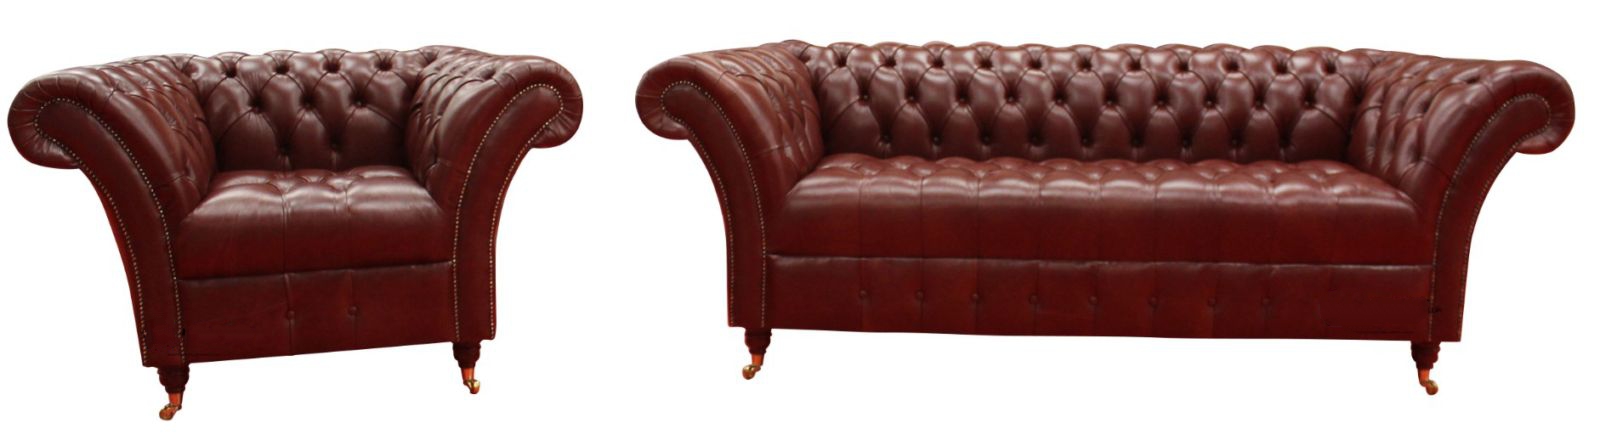 Product photograph of Chesterfield 3 Seater Armchair Old English Chestnut Leather Sofa Suite In Balmoral Style from Chesterfield Sofas.